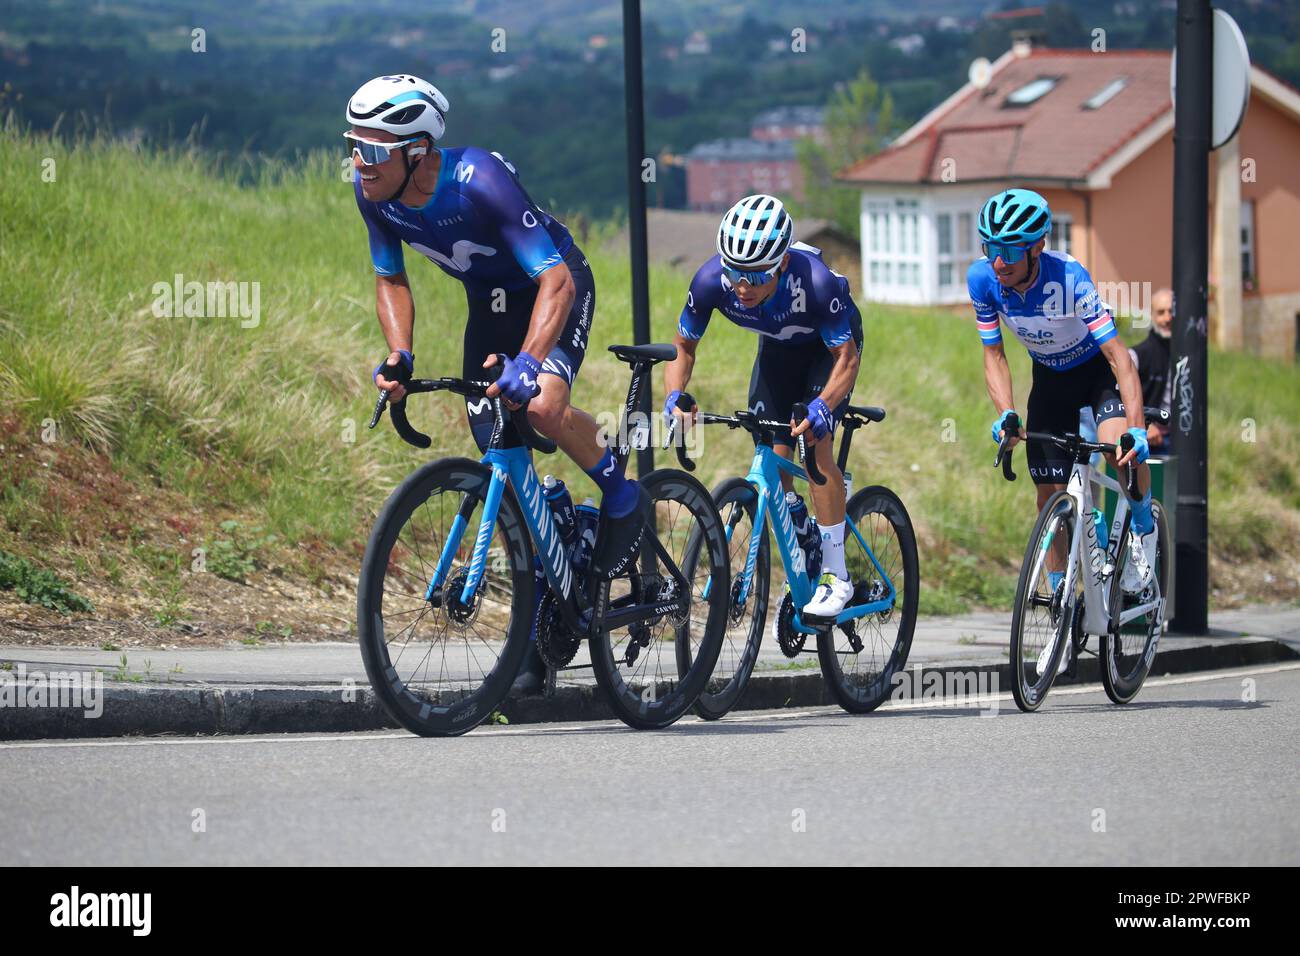 Oviedo, Spain, 30th April, 2023: Movistar Team rider Alberto Torres (L) followed by Einer Augusto Rubio (Movistar Team) and Lorenzo Fortunato (EOLO-Kometa, R) leading a group during the 3rd stage of the Vuelta a Asturias 2023 between Cangas del Narcea and Oviedo, on April 30, 2023, in Oviedo, Spain. Credit: Alberto Brevers / Alamy Live News Stock Photo